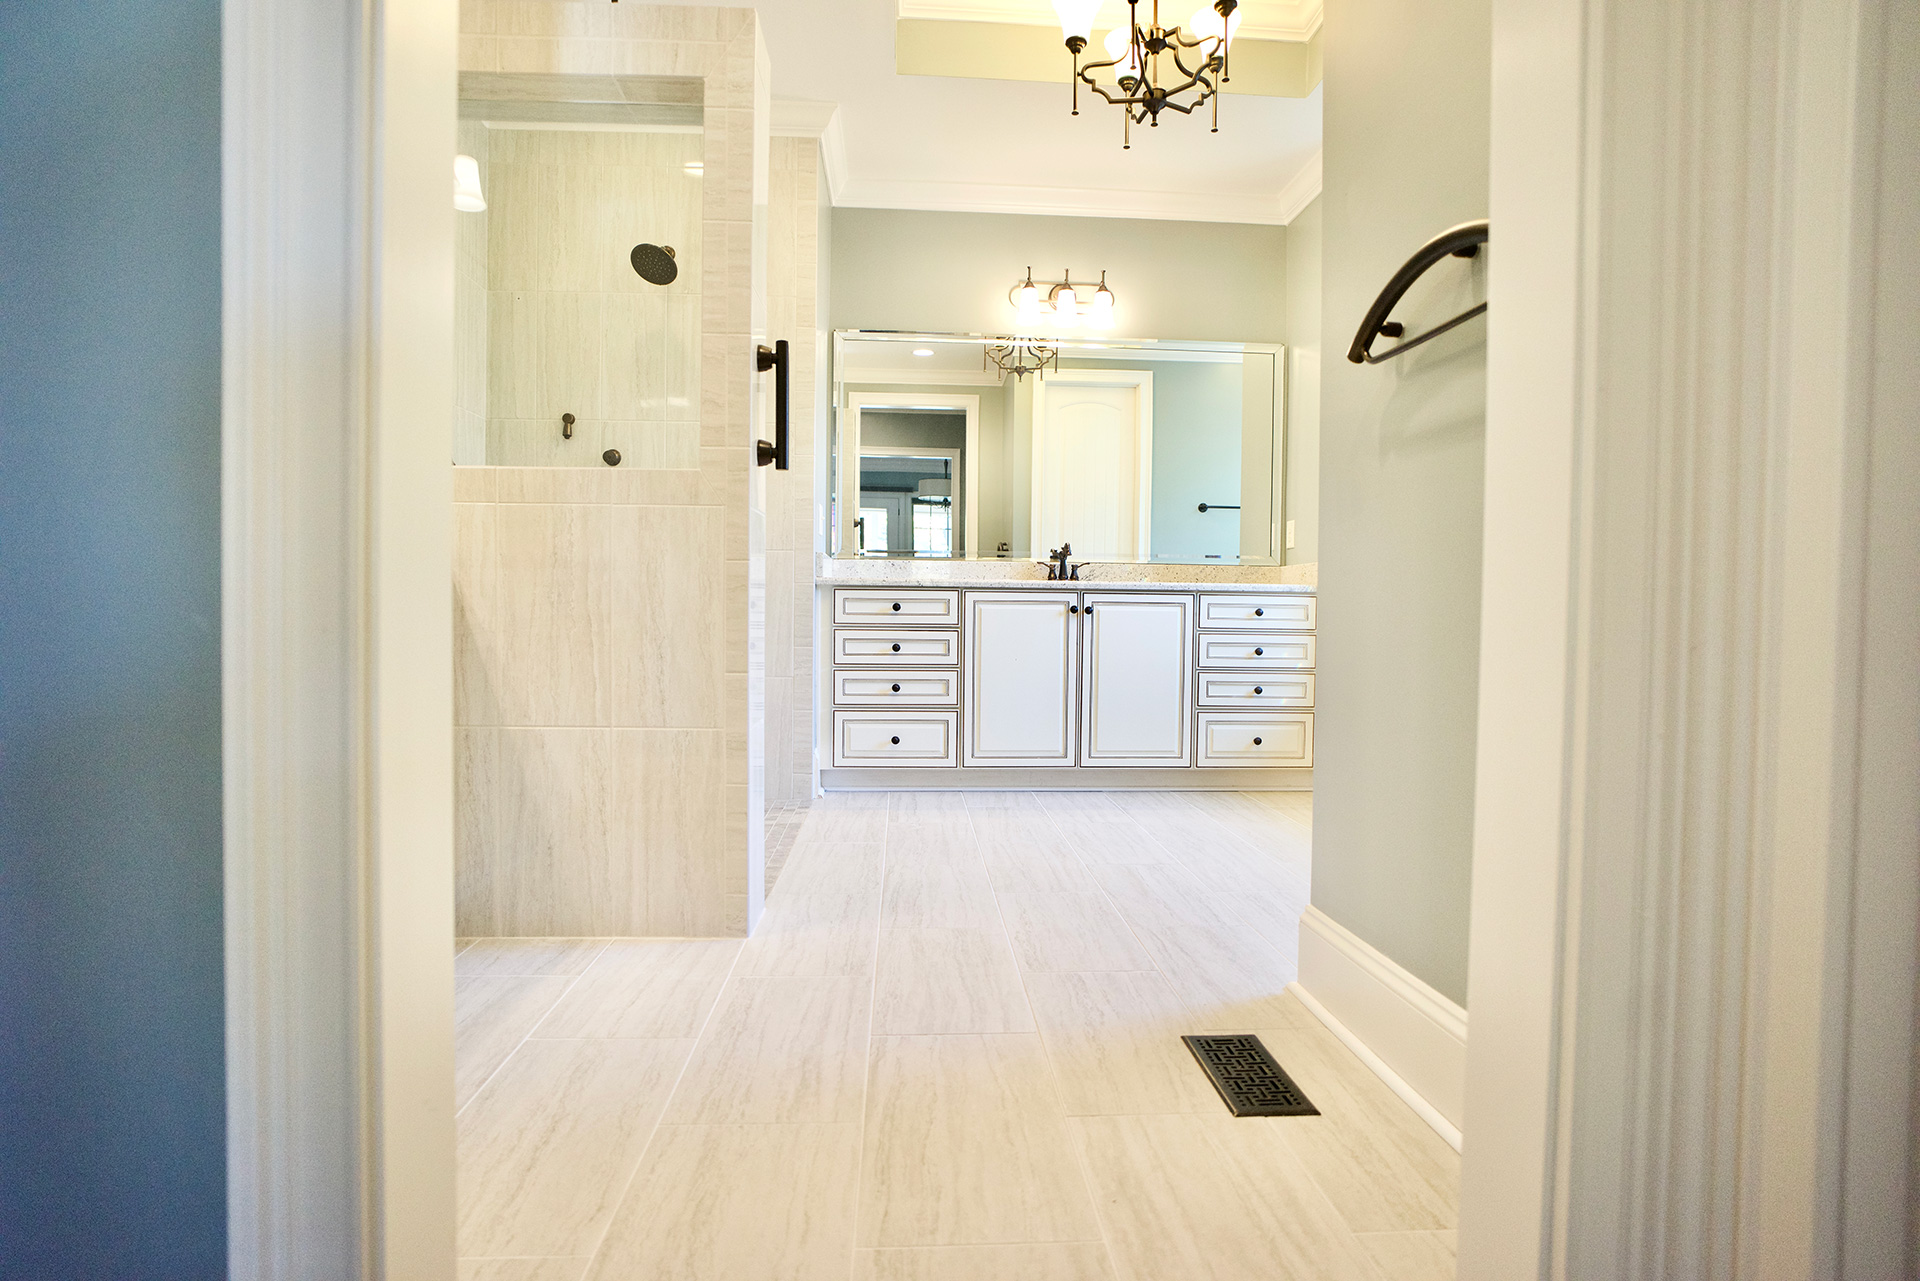 Luxury Master bathroom design and remodel by Riverbirch Remodeling